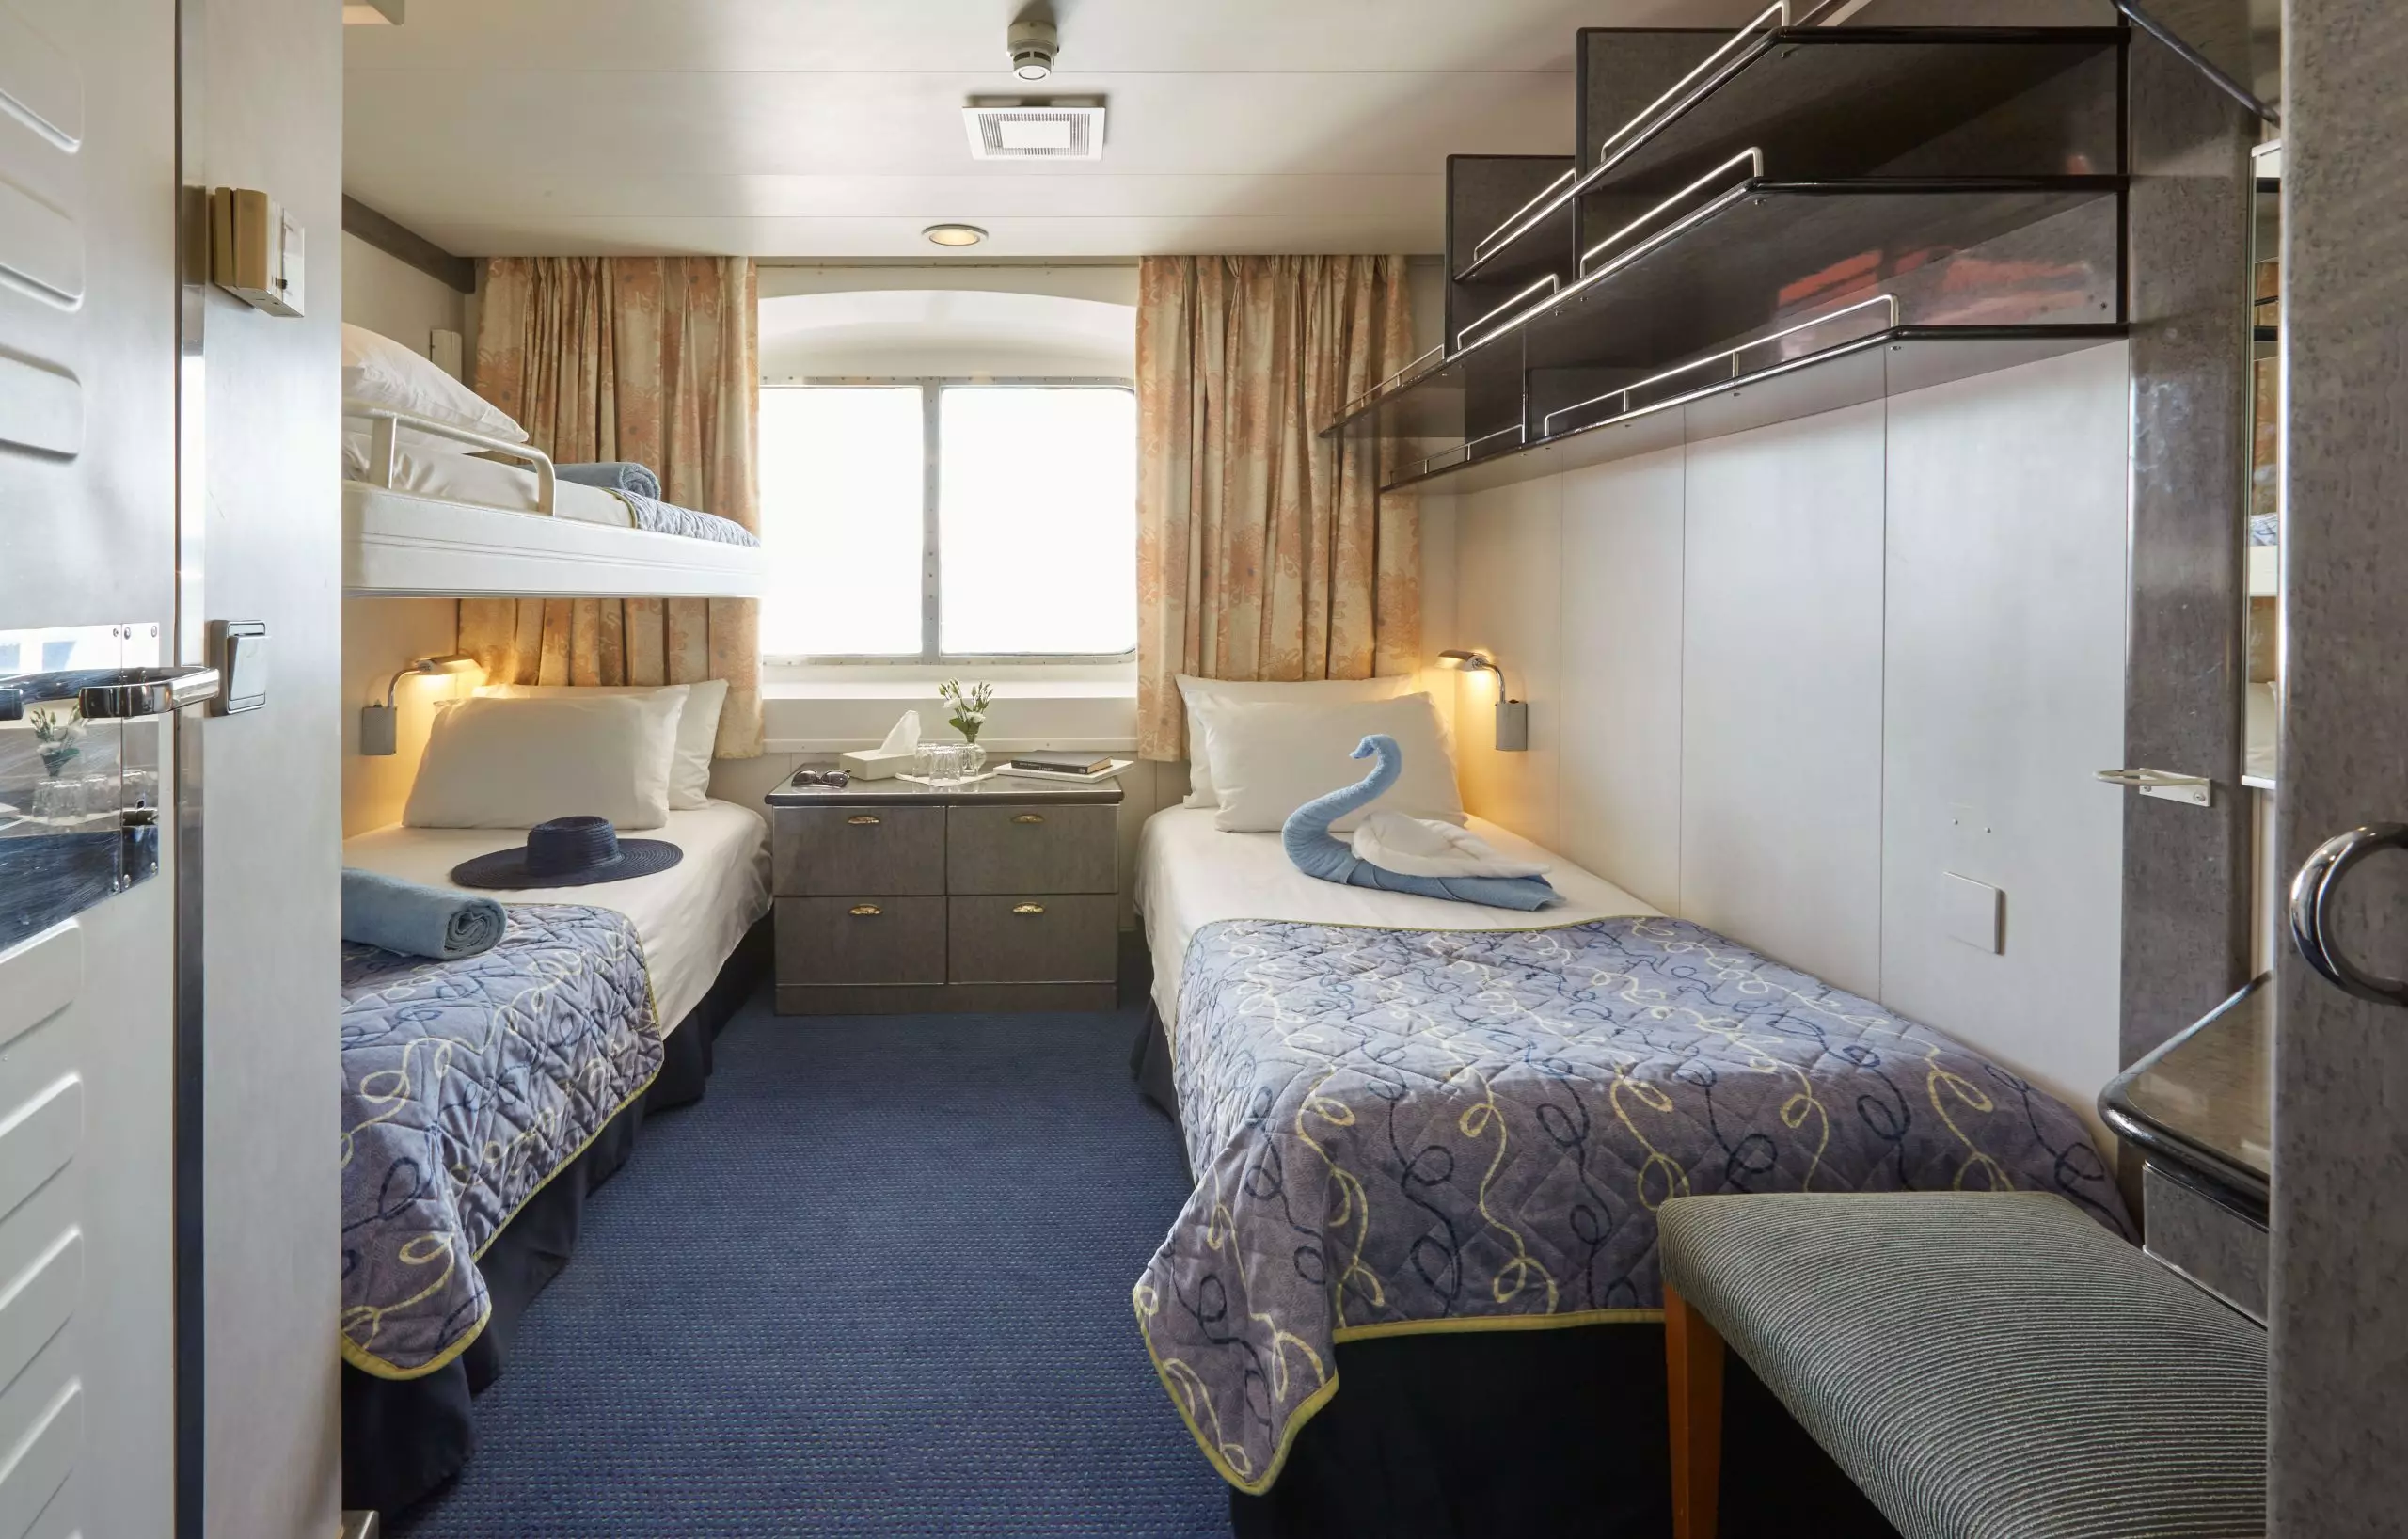 crystal staterooms xbo 1